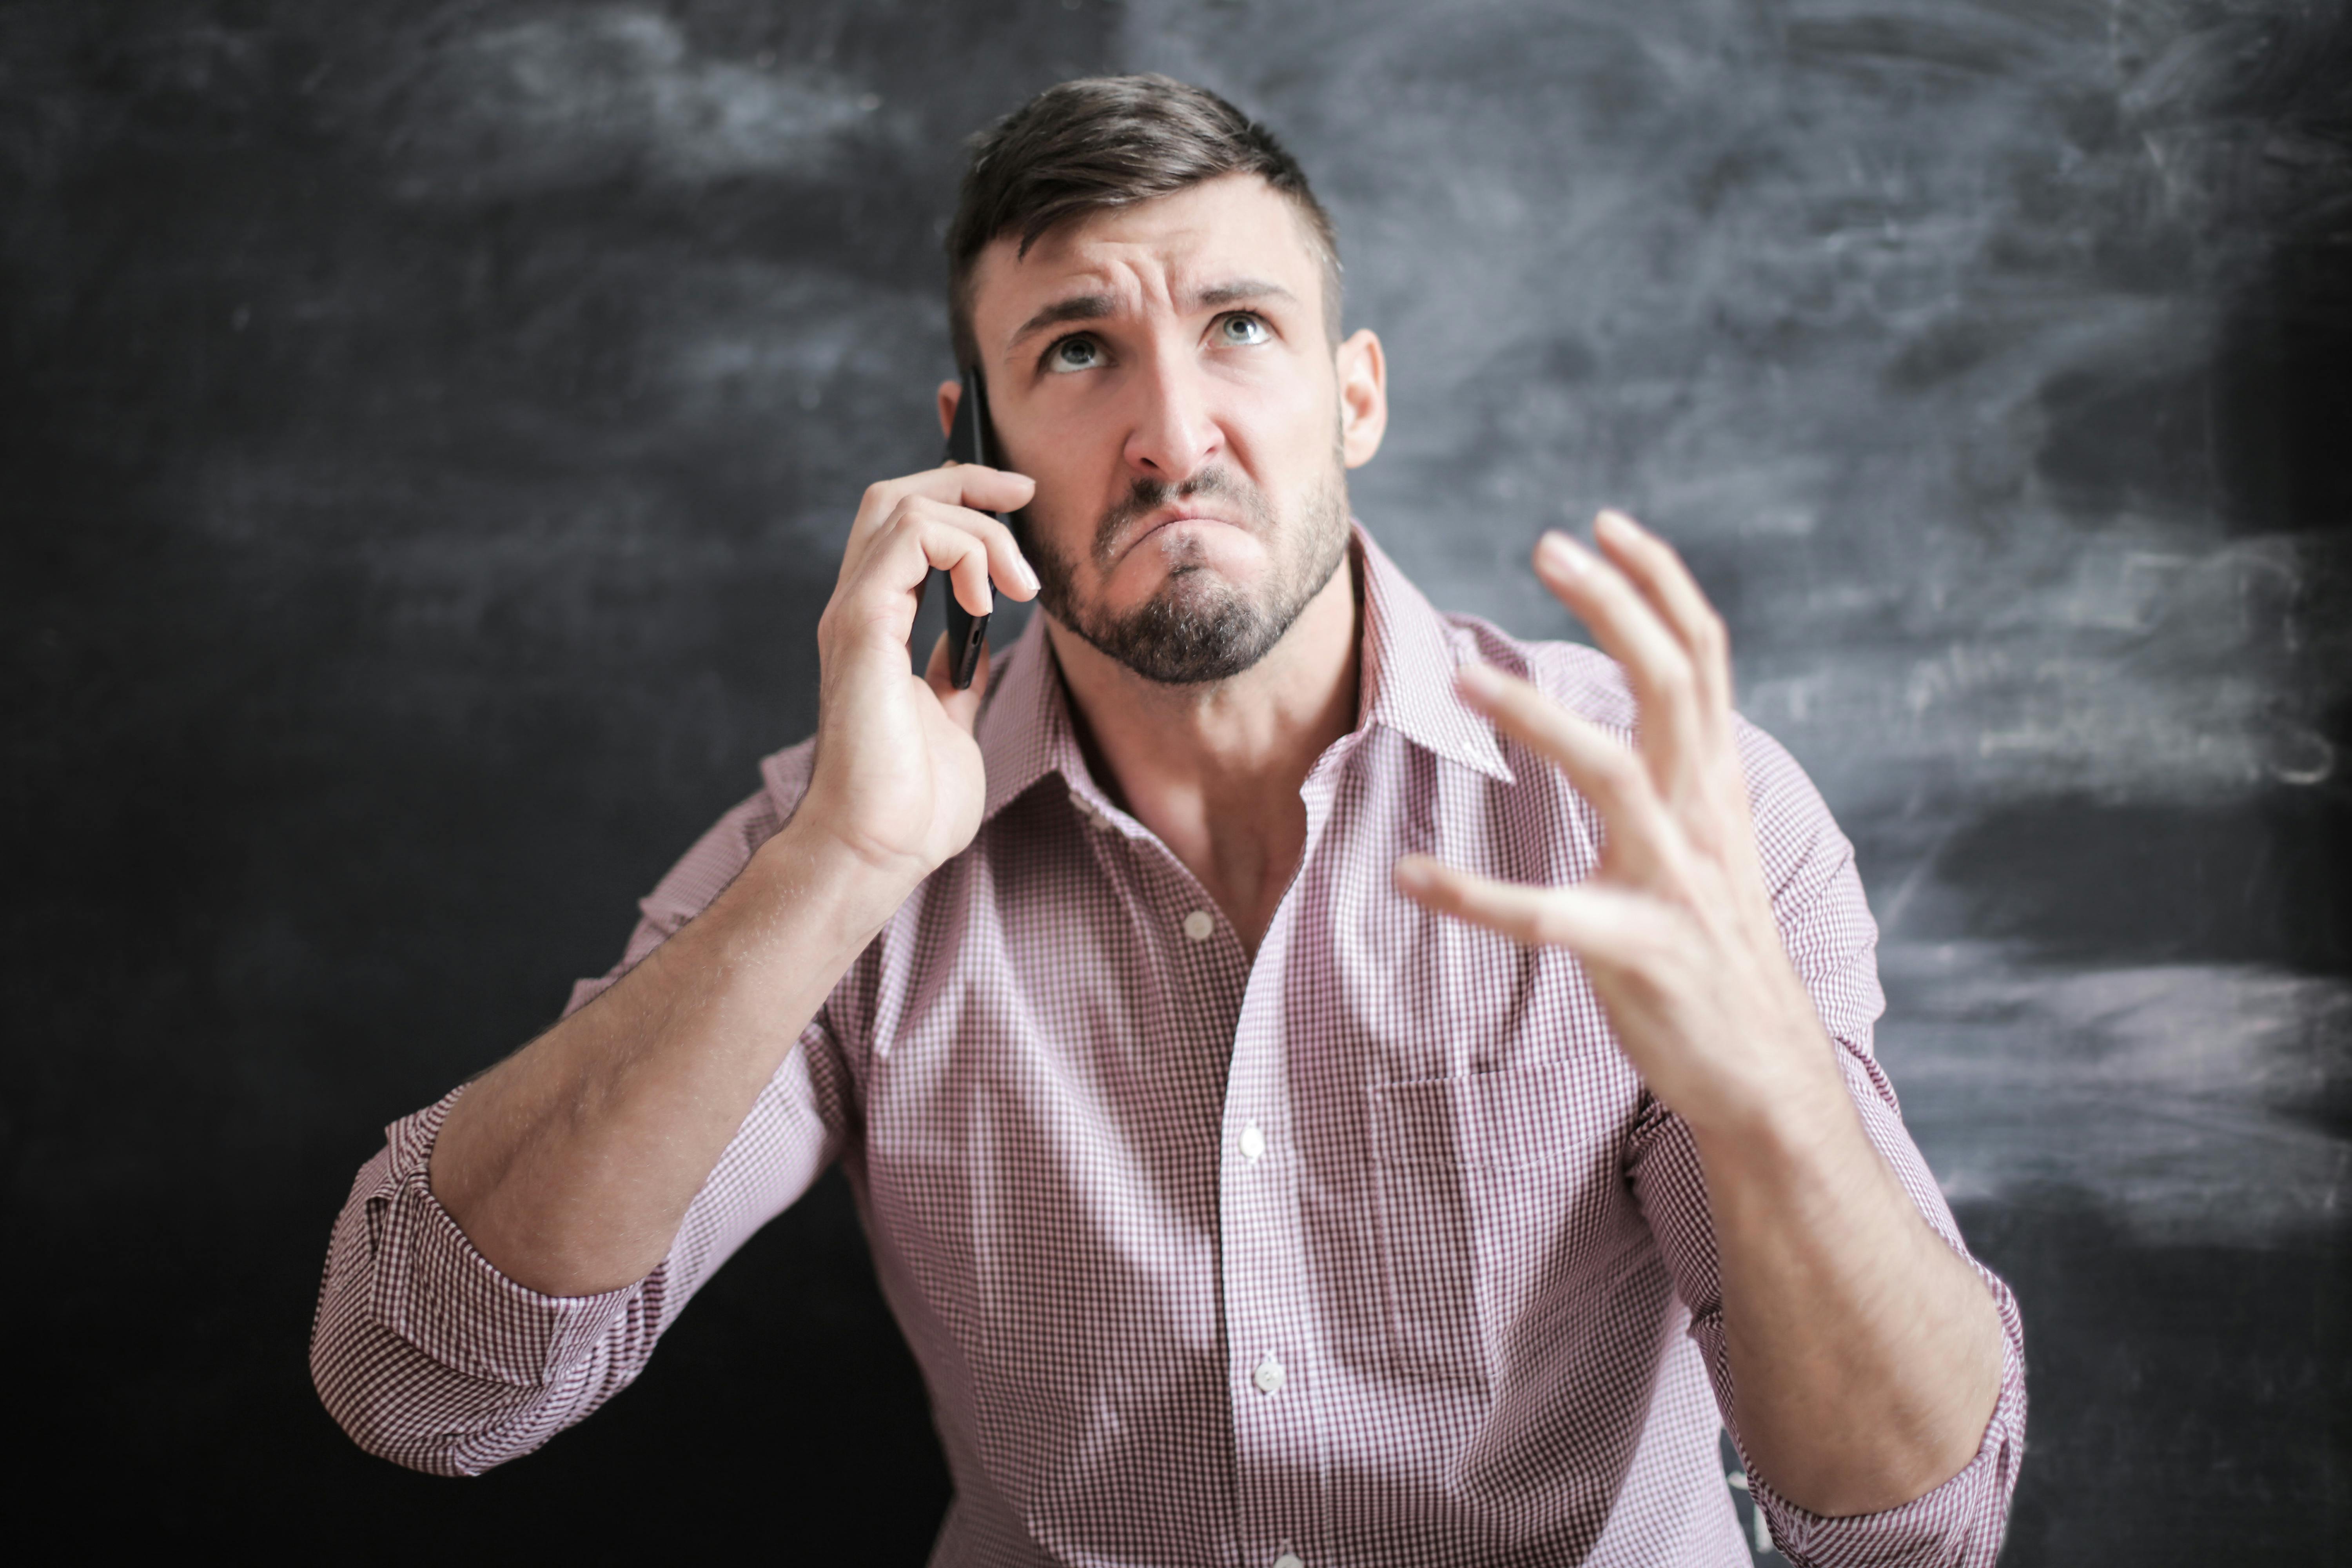 Angry man using a mobile phone. | Photo: Pexels